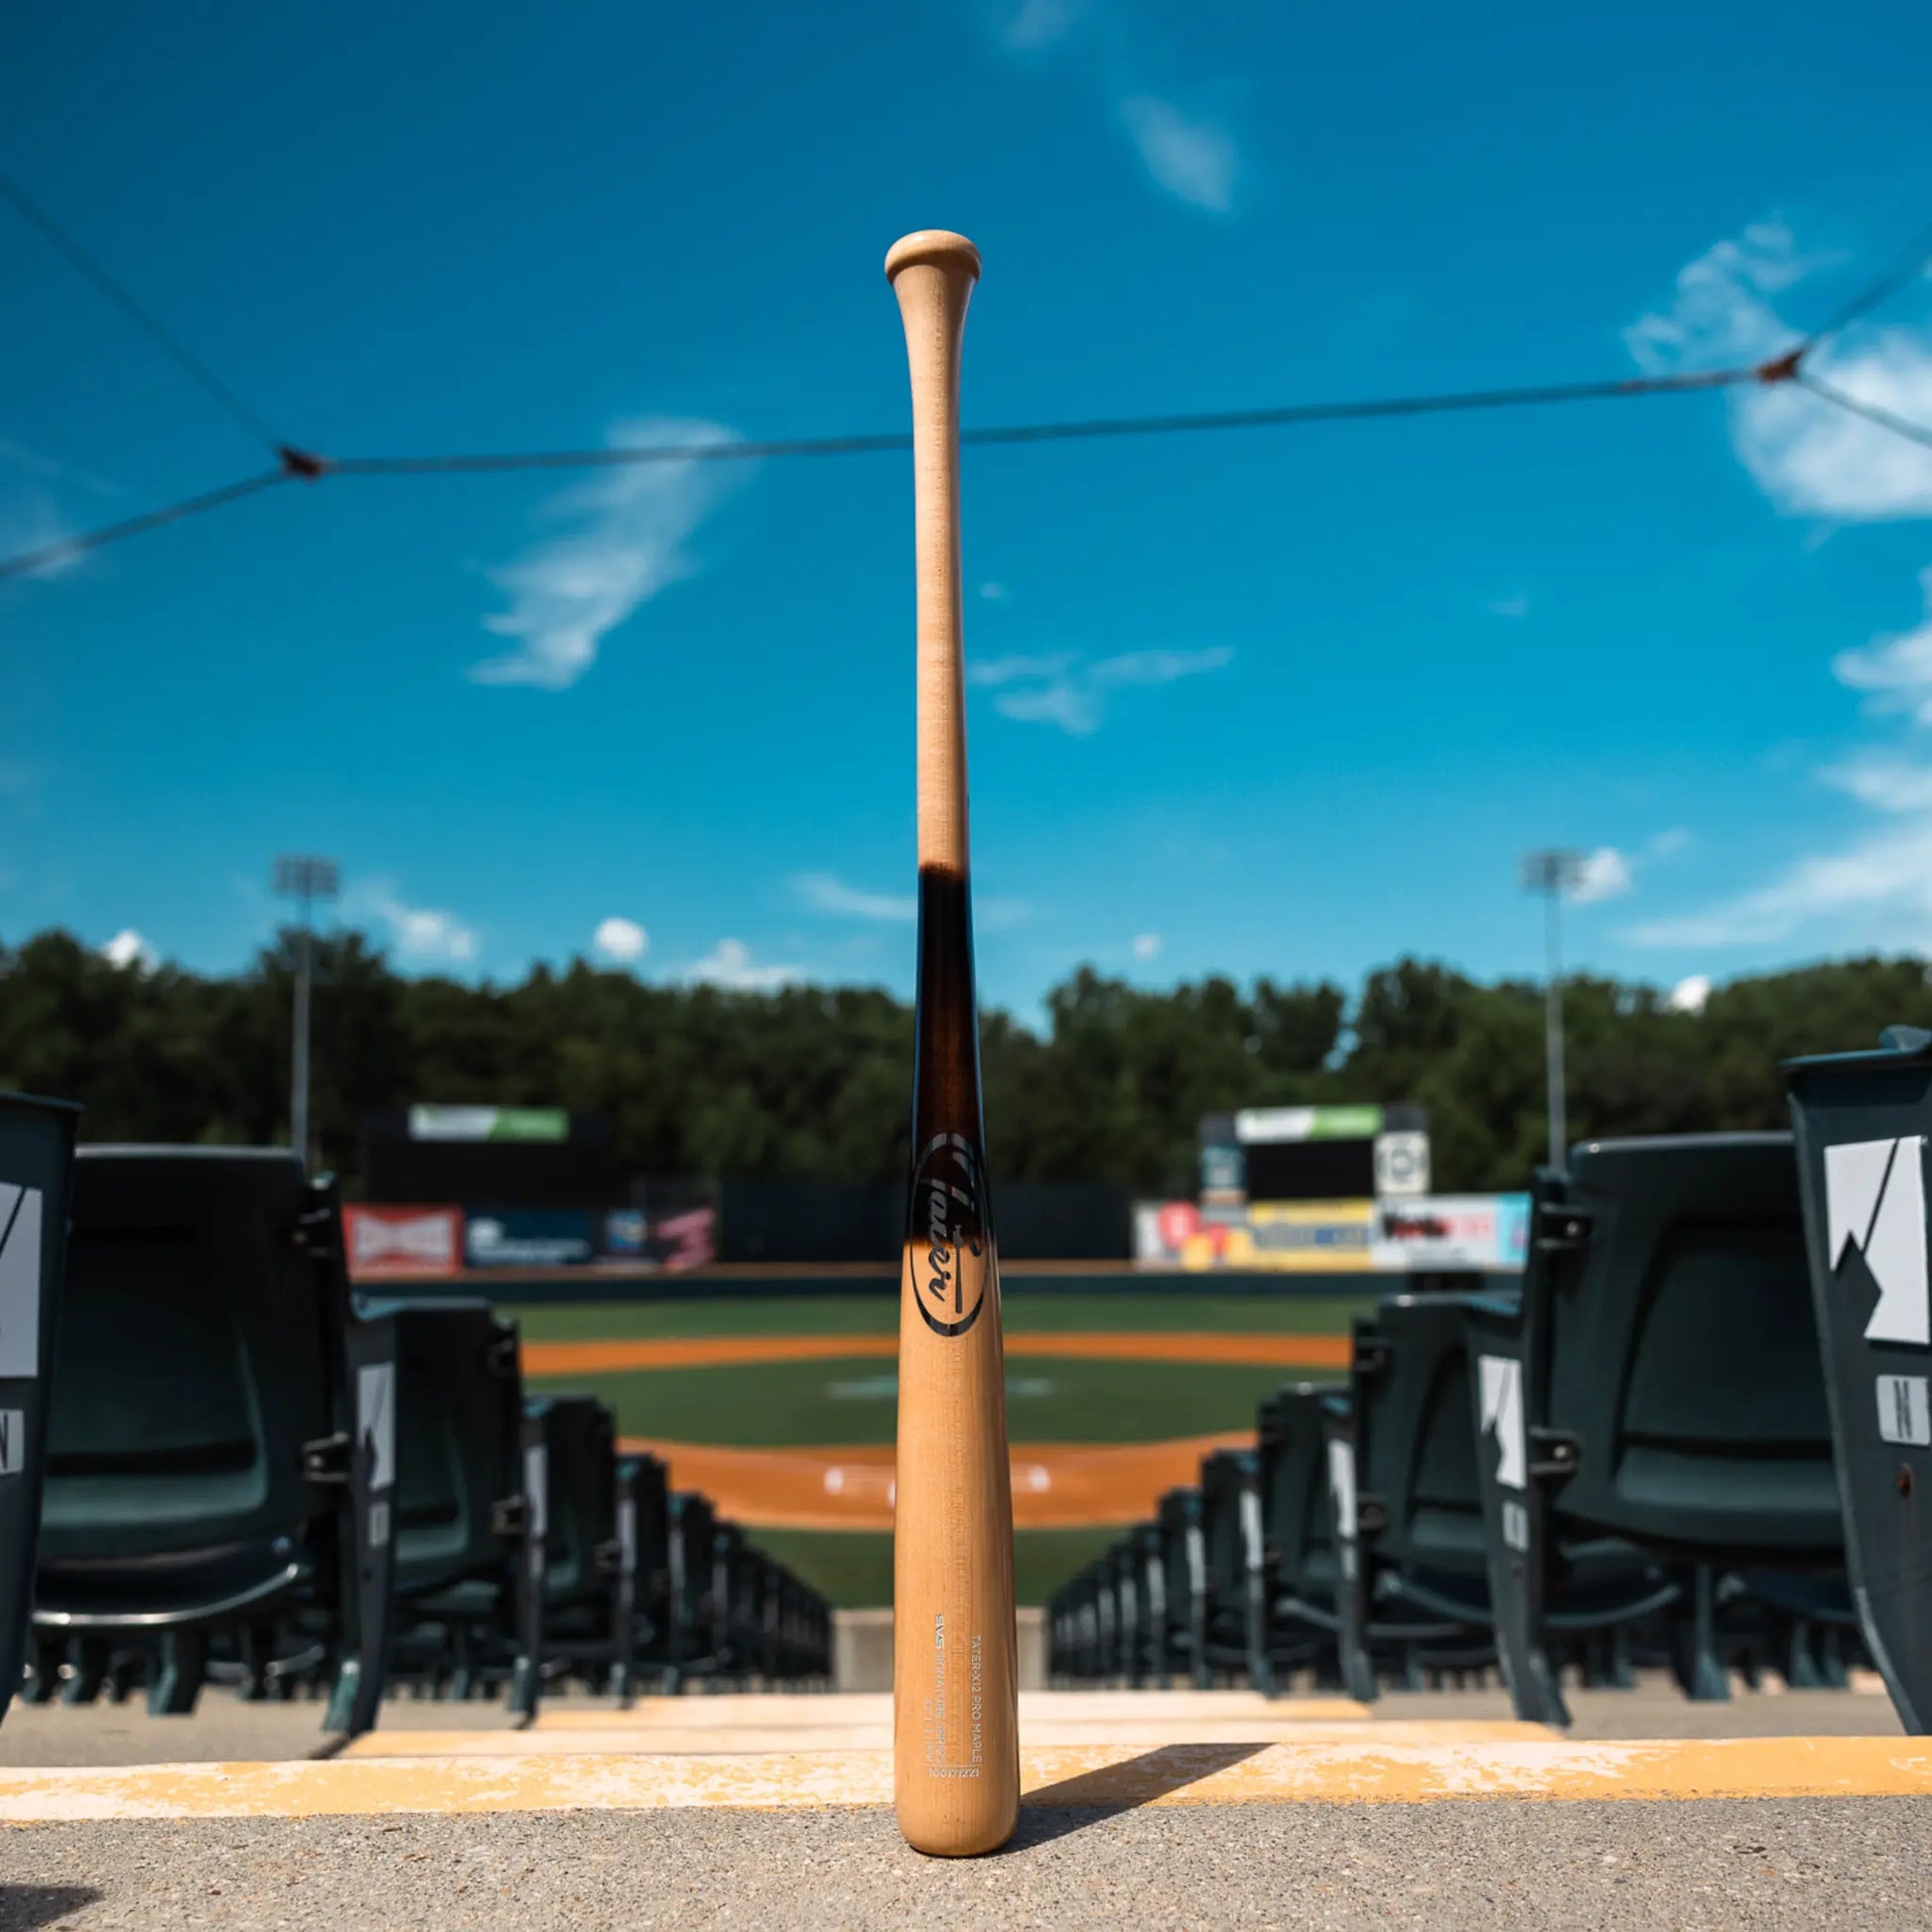 The image showcases a Tater X12 Pro Maple bat standing upright on the stands behind home plate, set against the backdrop of an empty baseball stadium under a vivid blue sky. The bat's natural finish and prominent Tater logo reflect the bat's quality.